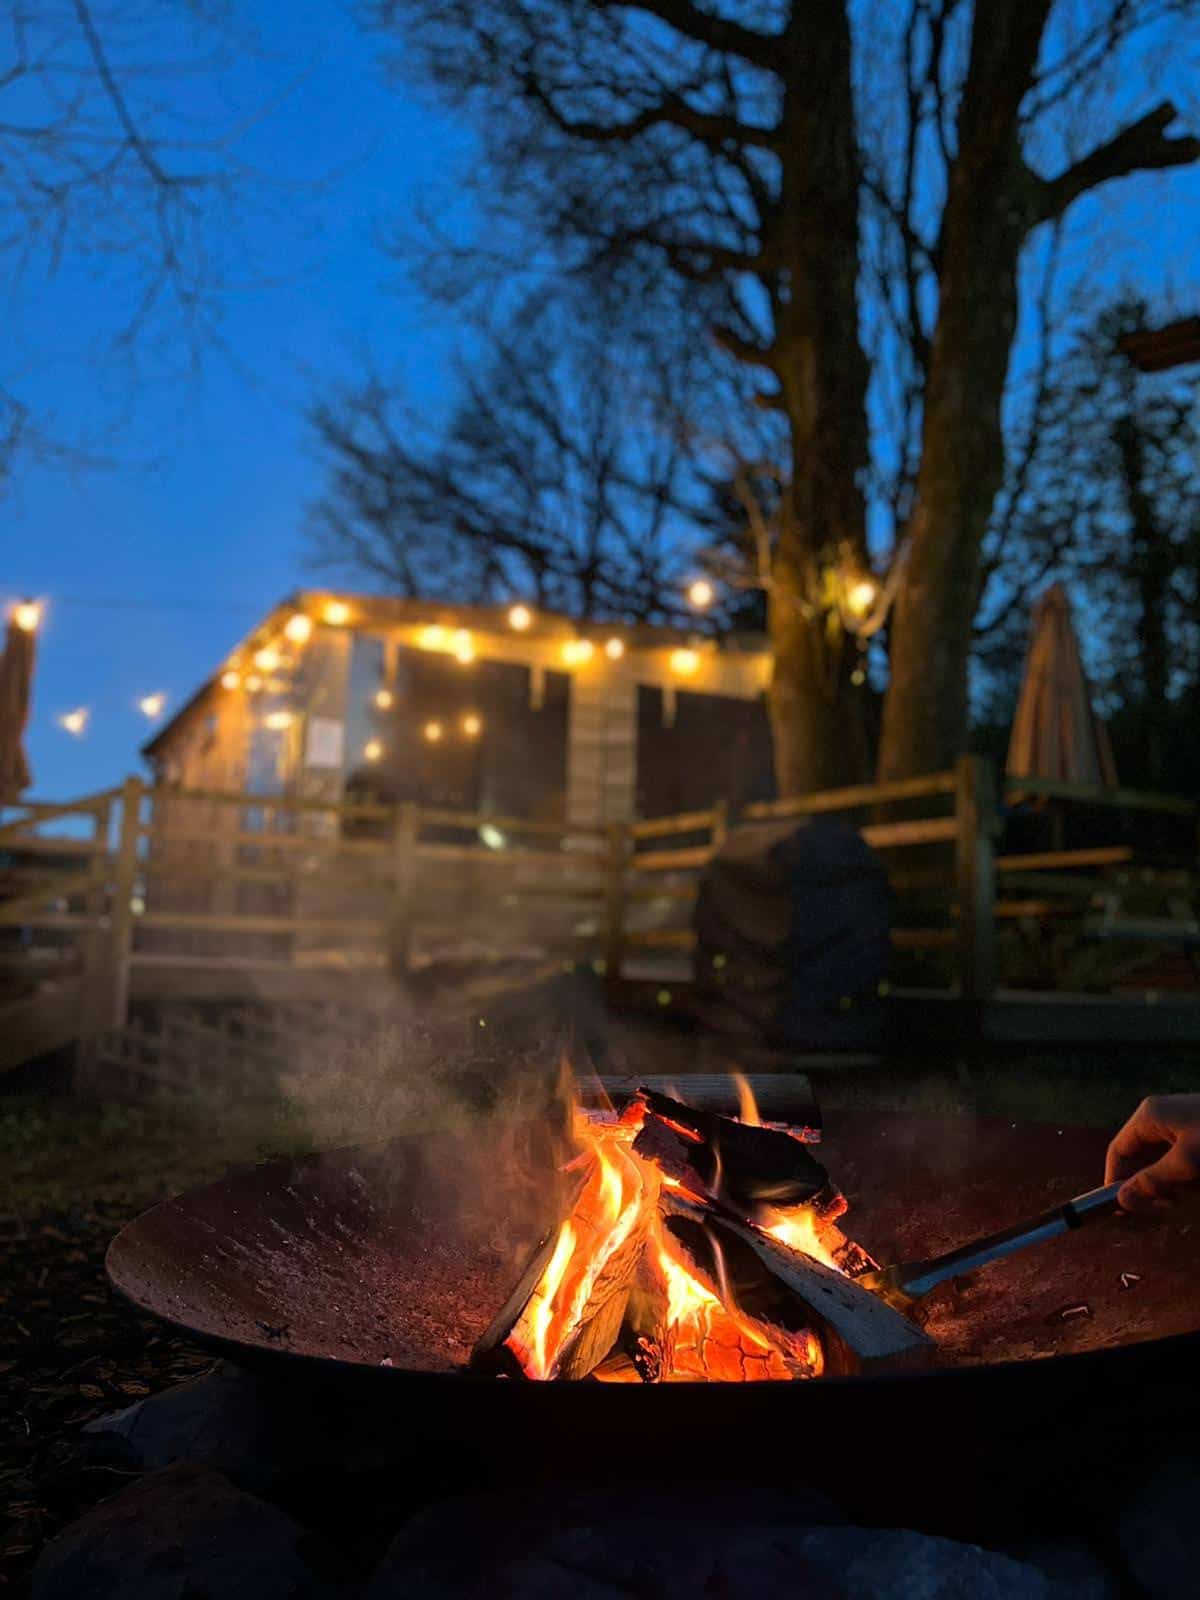 A person sitting by a campfire, grilling food on the fire, creating a cozy outdoor ambiance